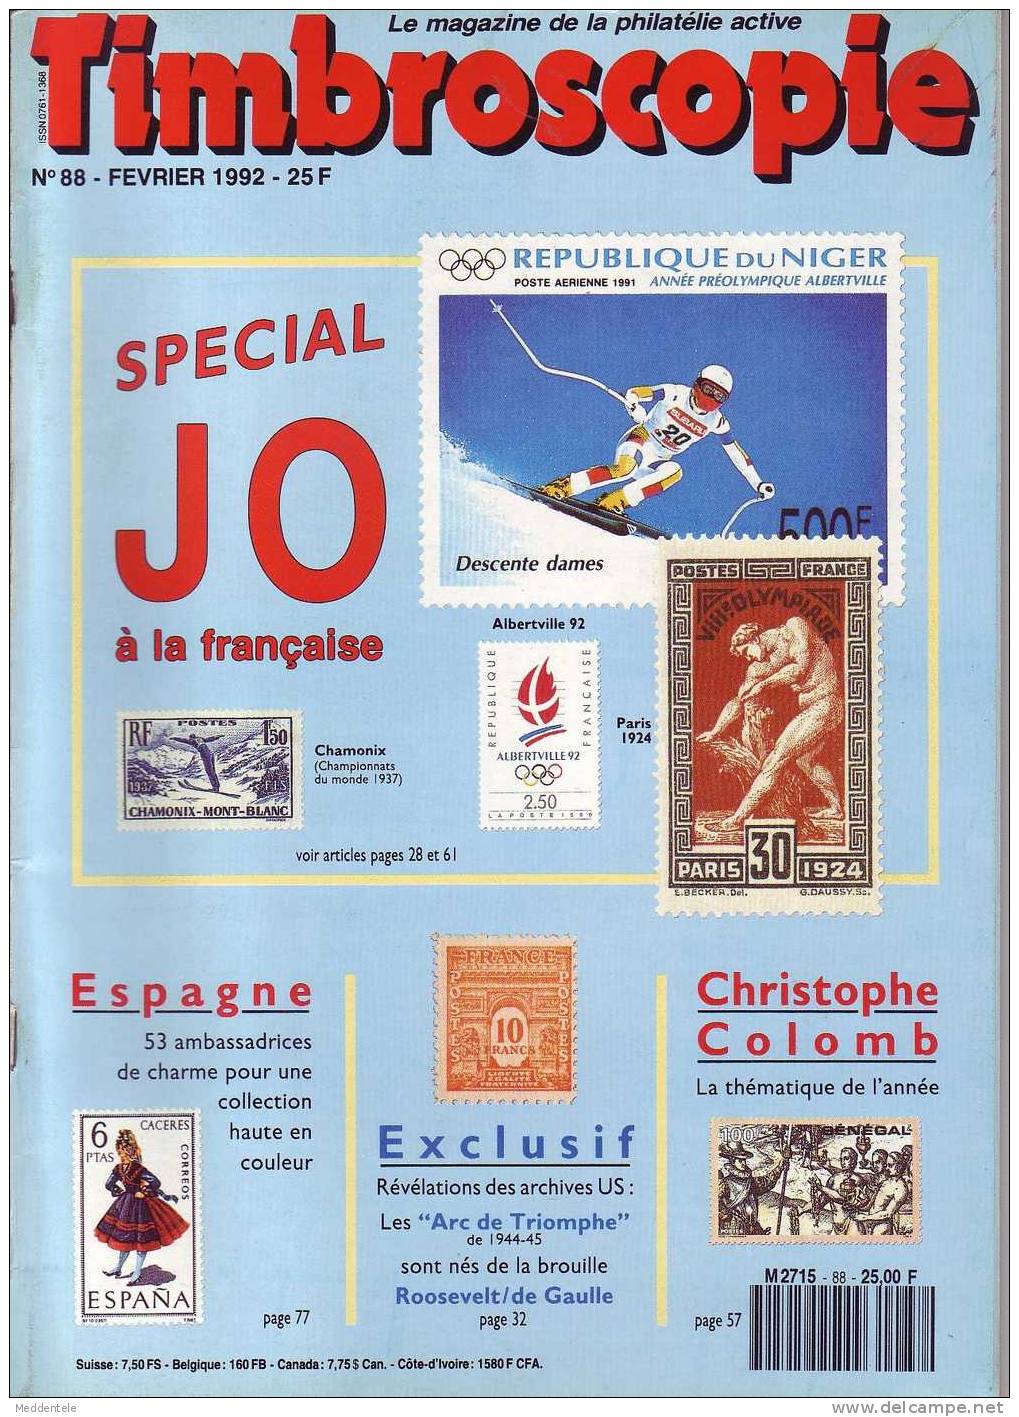 Timbroscopie N 88 Fev 1992 Special Jeux Olympiques JO - French (from 1941)